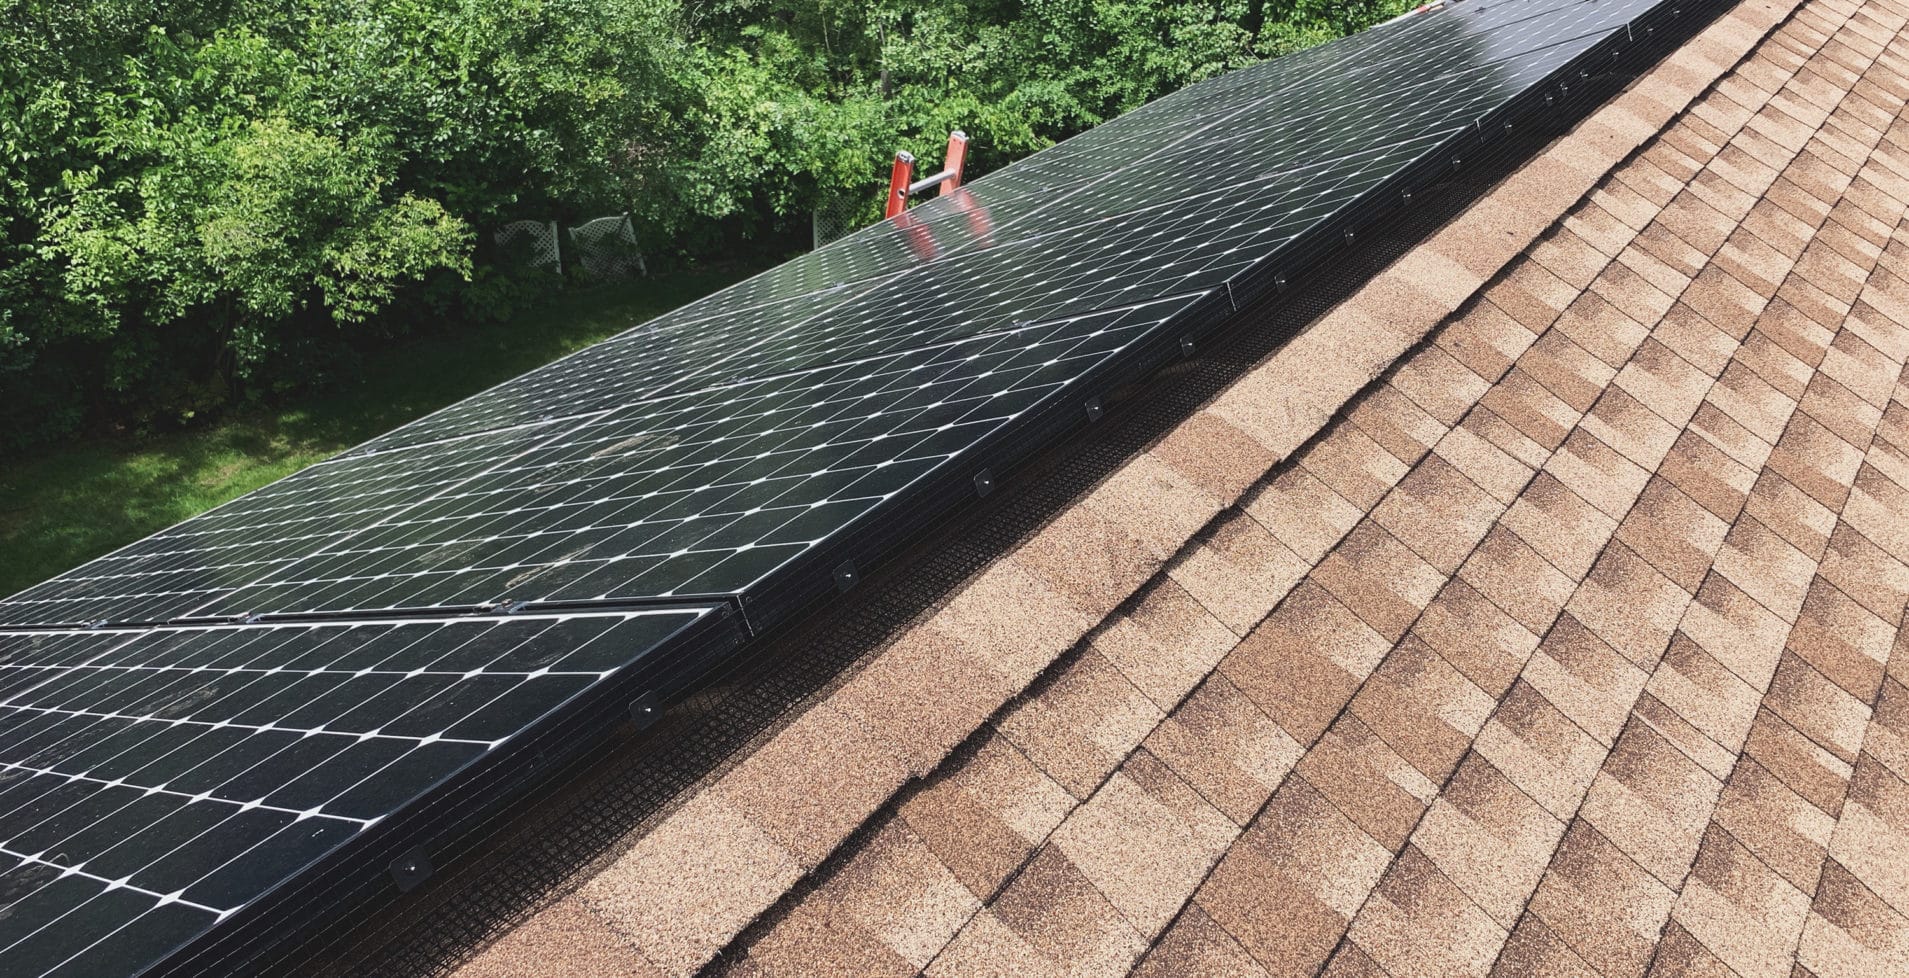 Critter Guard installed by Sunlight Solar Massachusetts on a rooftop solar system.